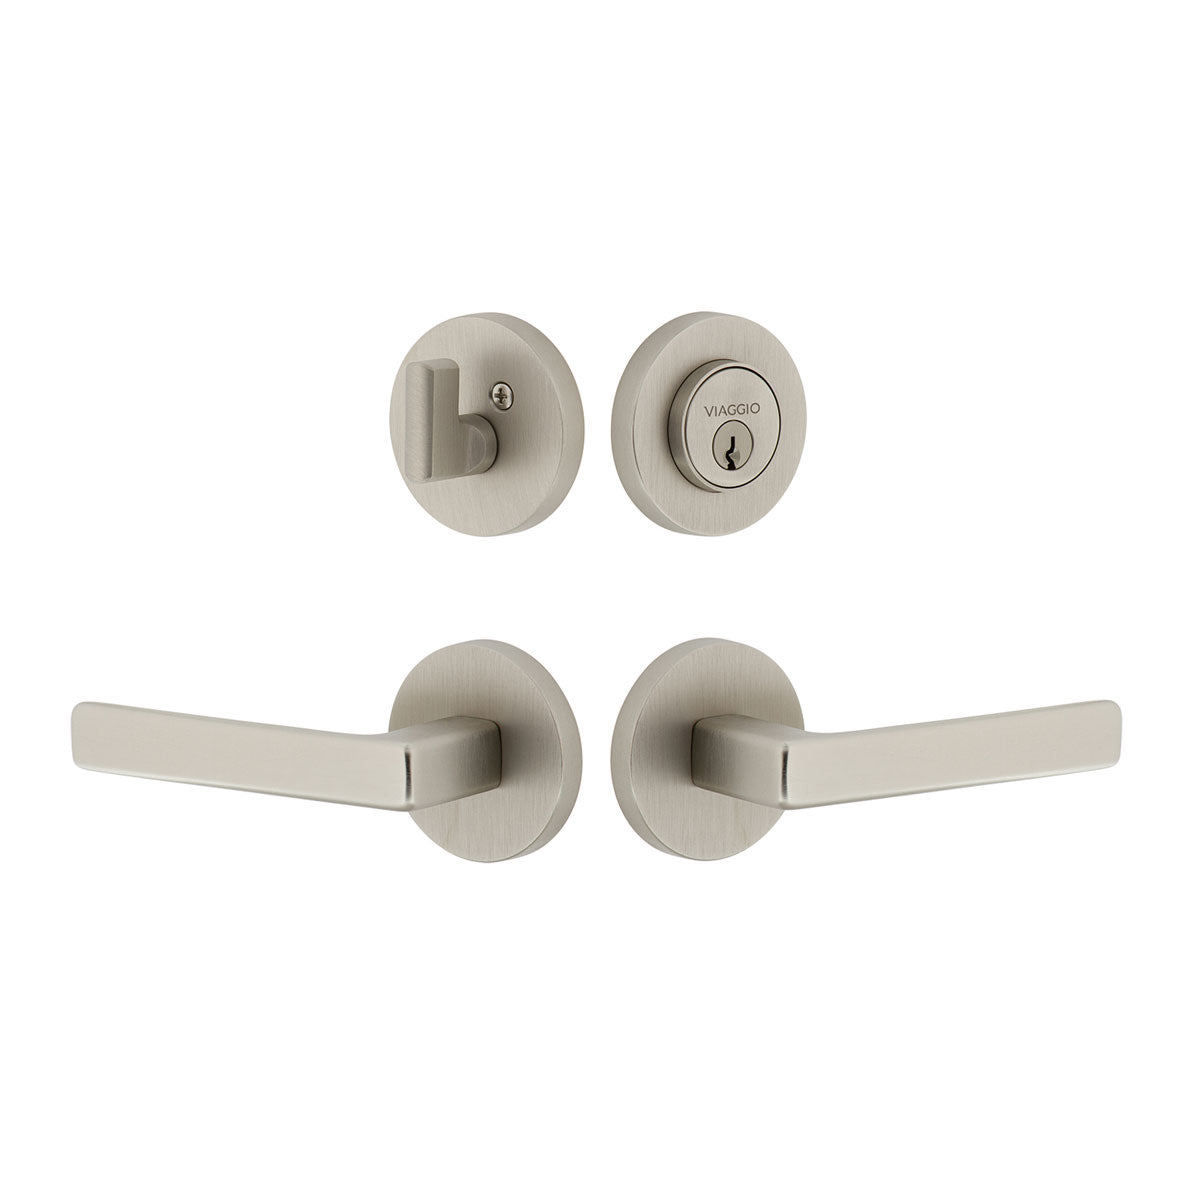 Circolo Rosette Entry Set with Lusso Lever in Satin Nickel